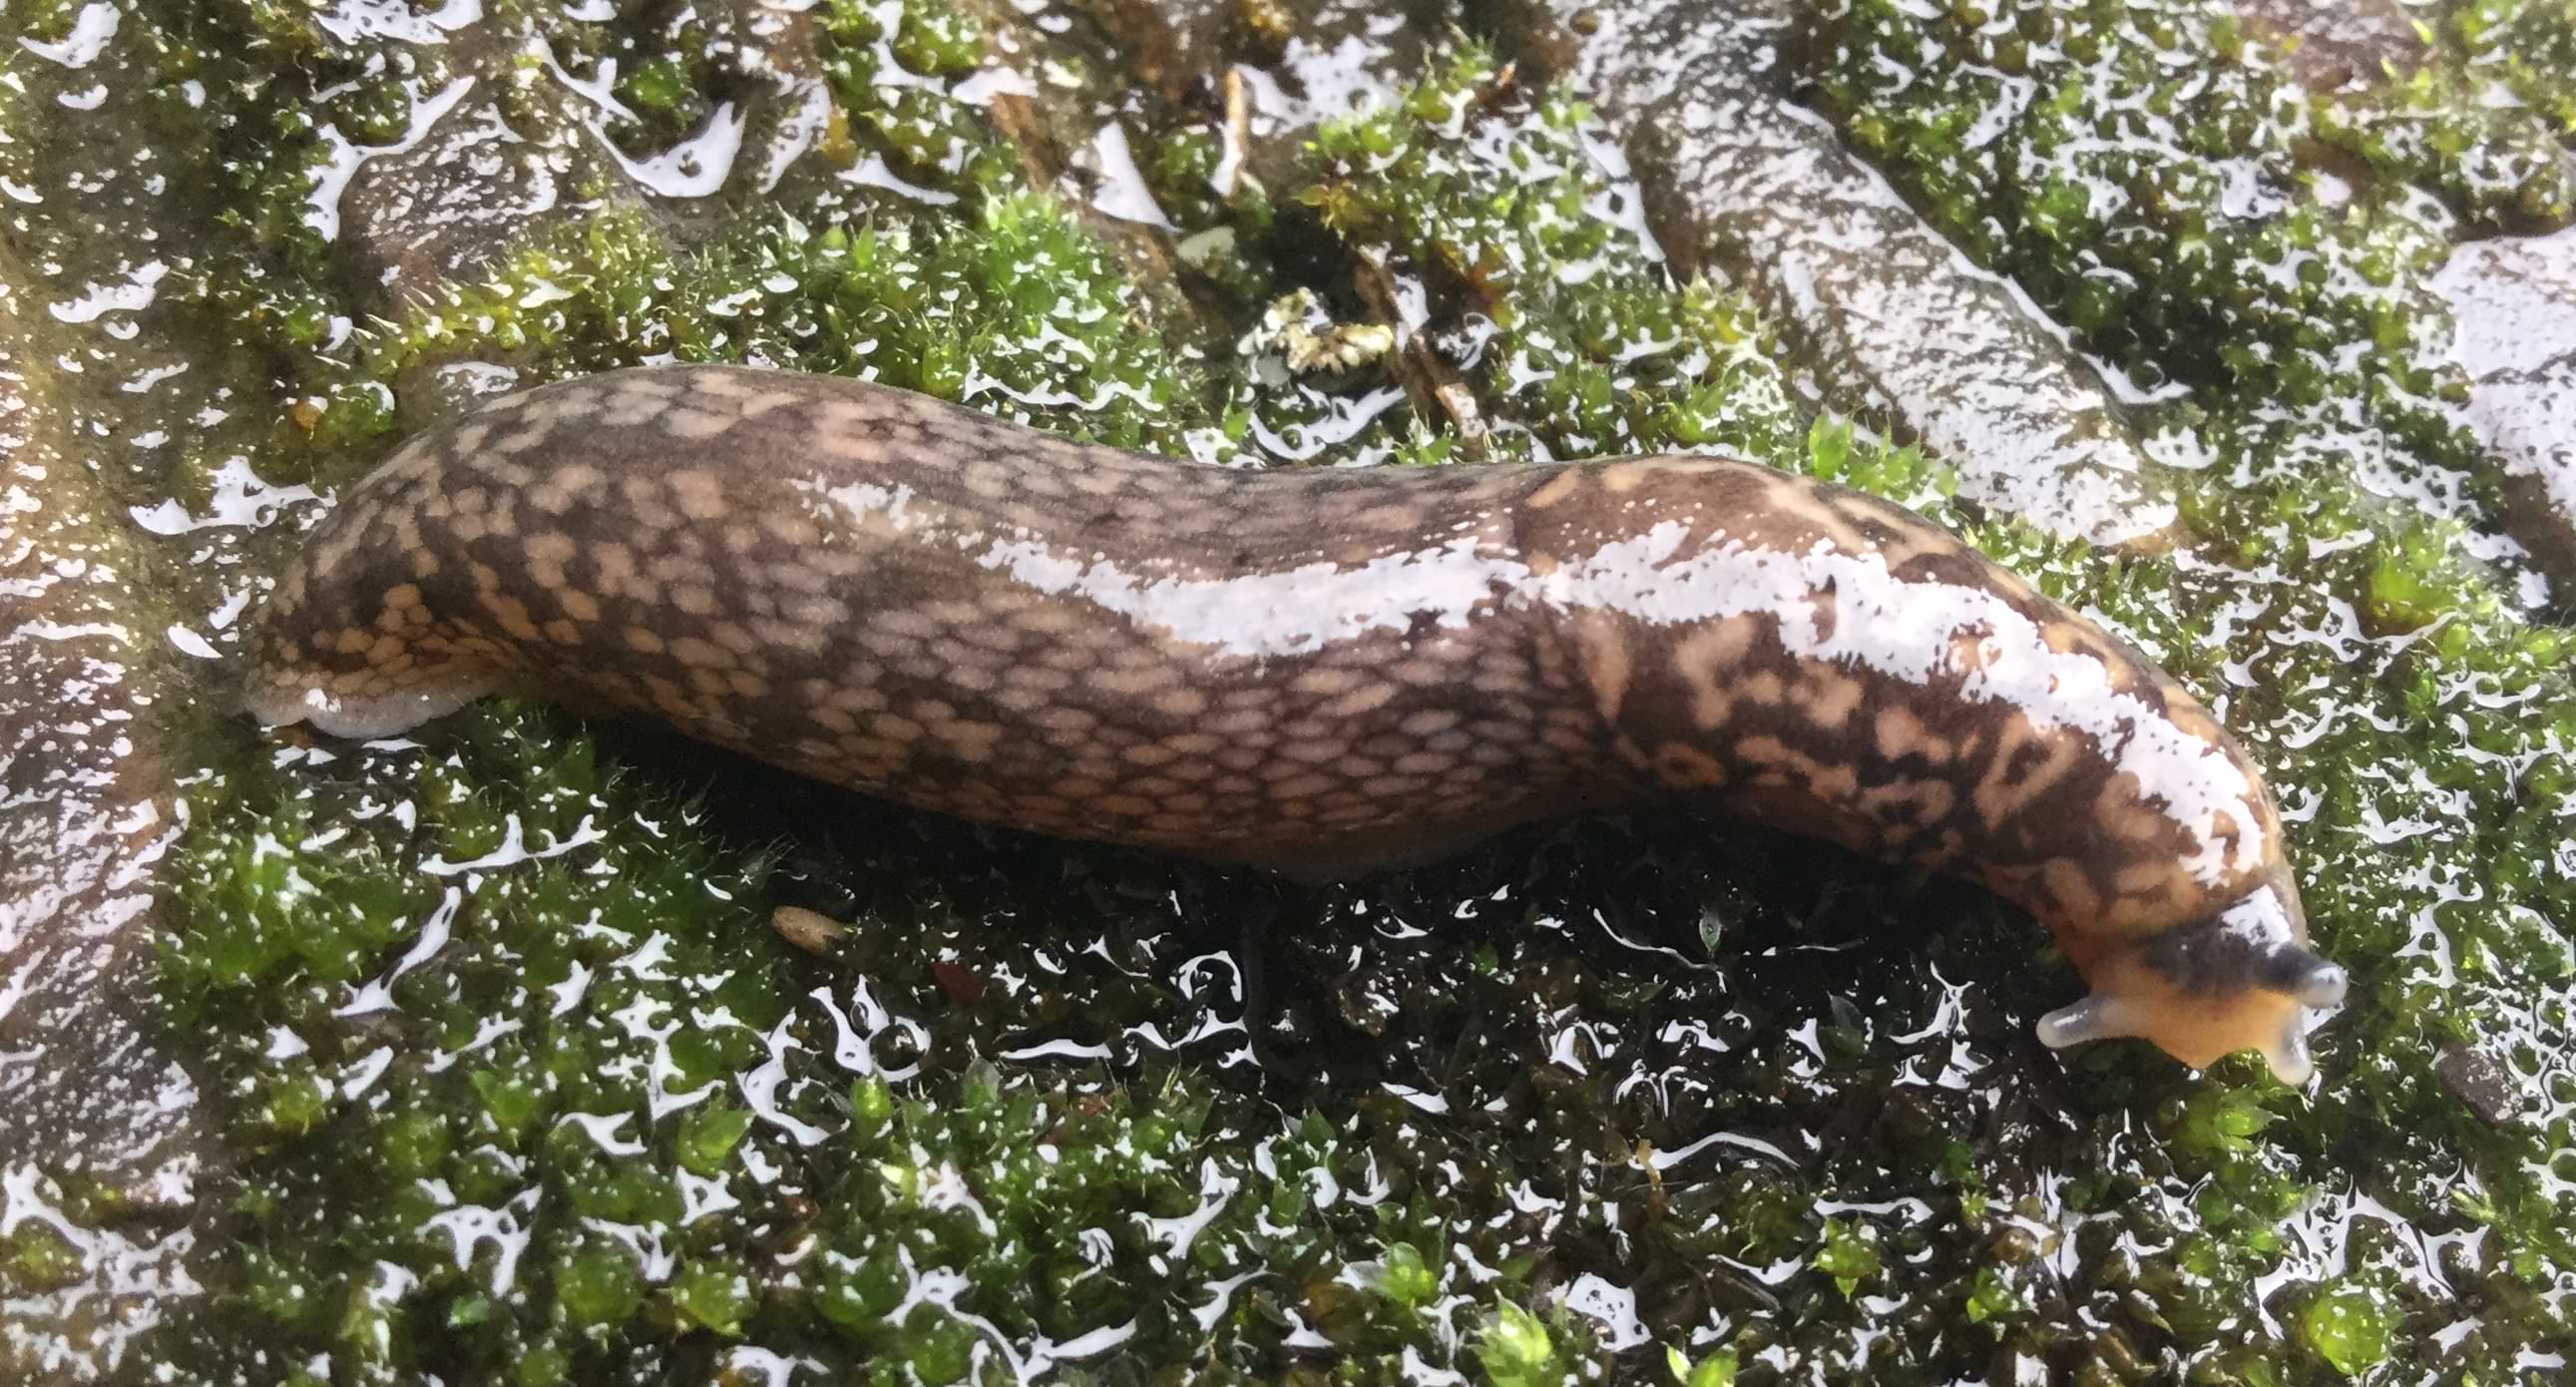 A long dark green slug with spotted markings all over its body.